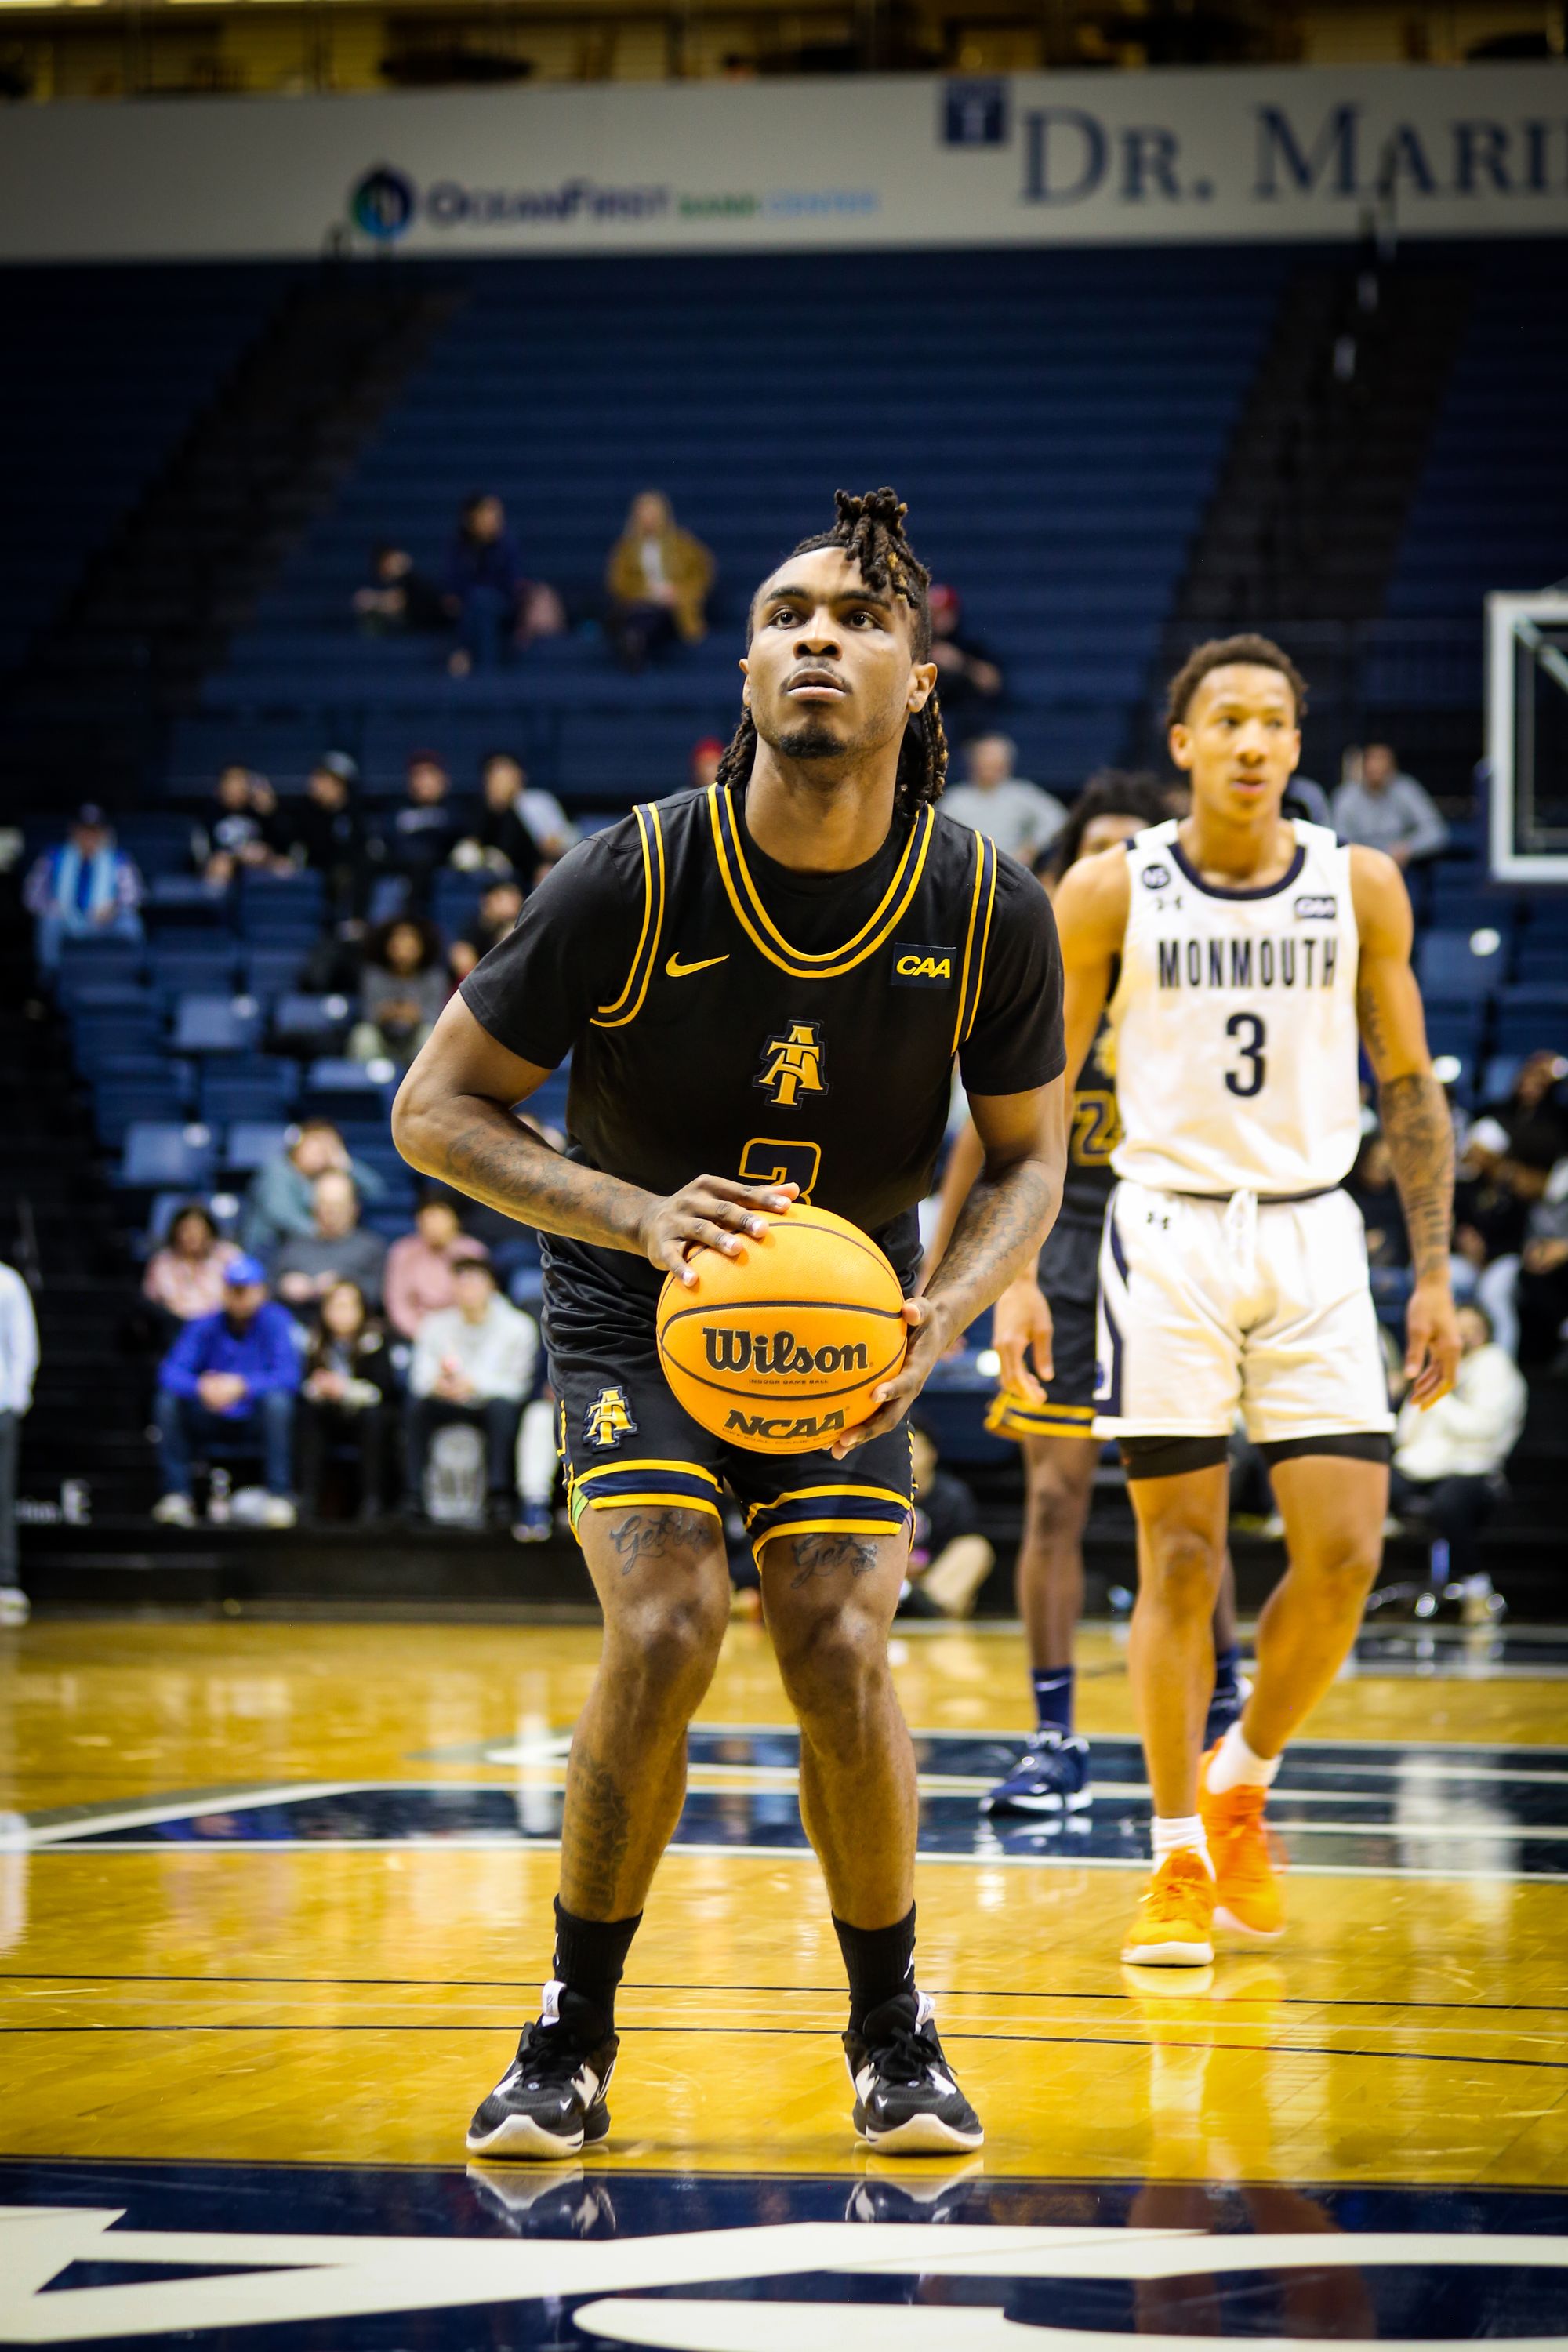 North Carolina A&T Struggles in Men's Basketball with Fourth Loss in Five Games